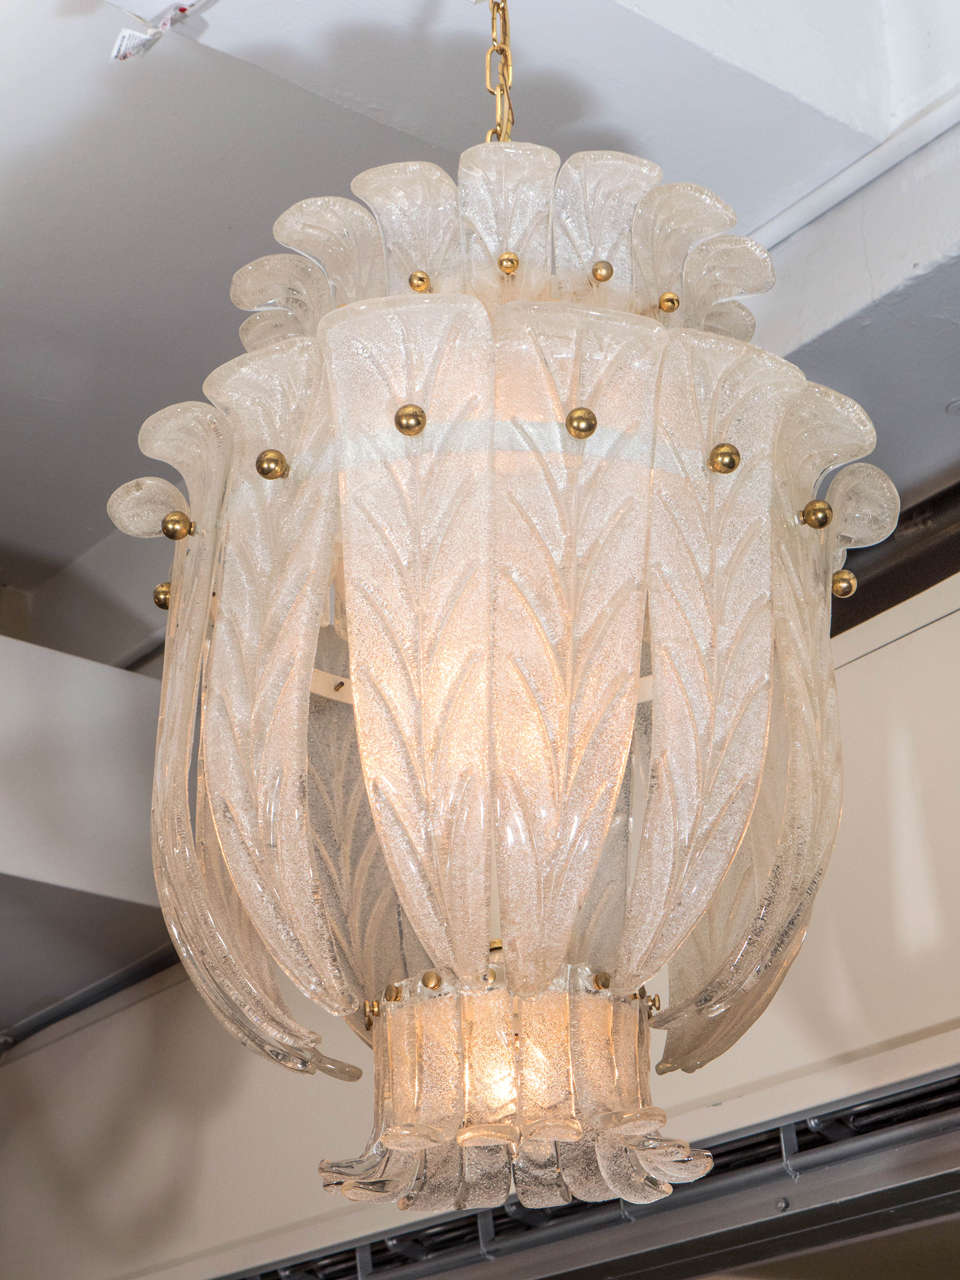 A vintage Italian chandelier by Barovier and Toso, with two-tiers of textured and stylistically curled glass leaves, detailed with veins, affixed to brass circular frames by round brass studs. Wiring and sockets to US standard, requires nine